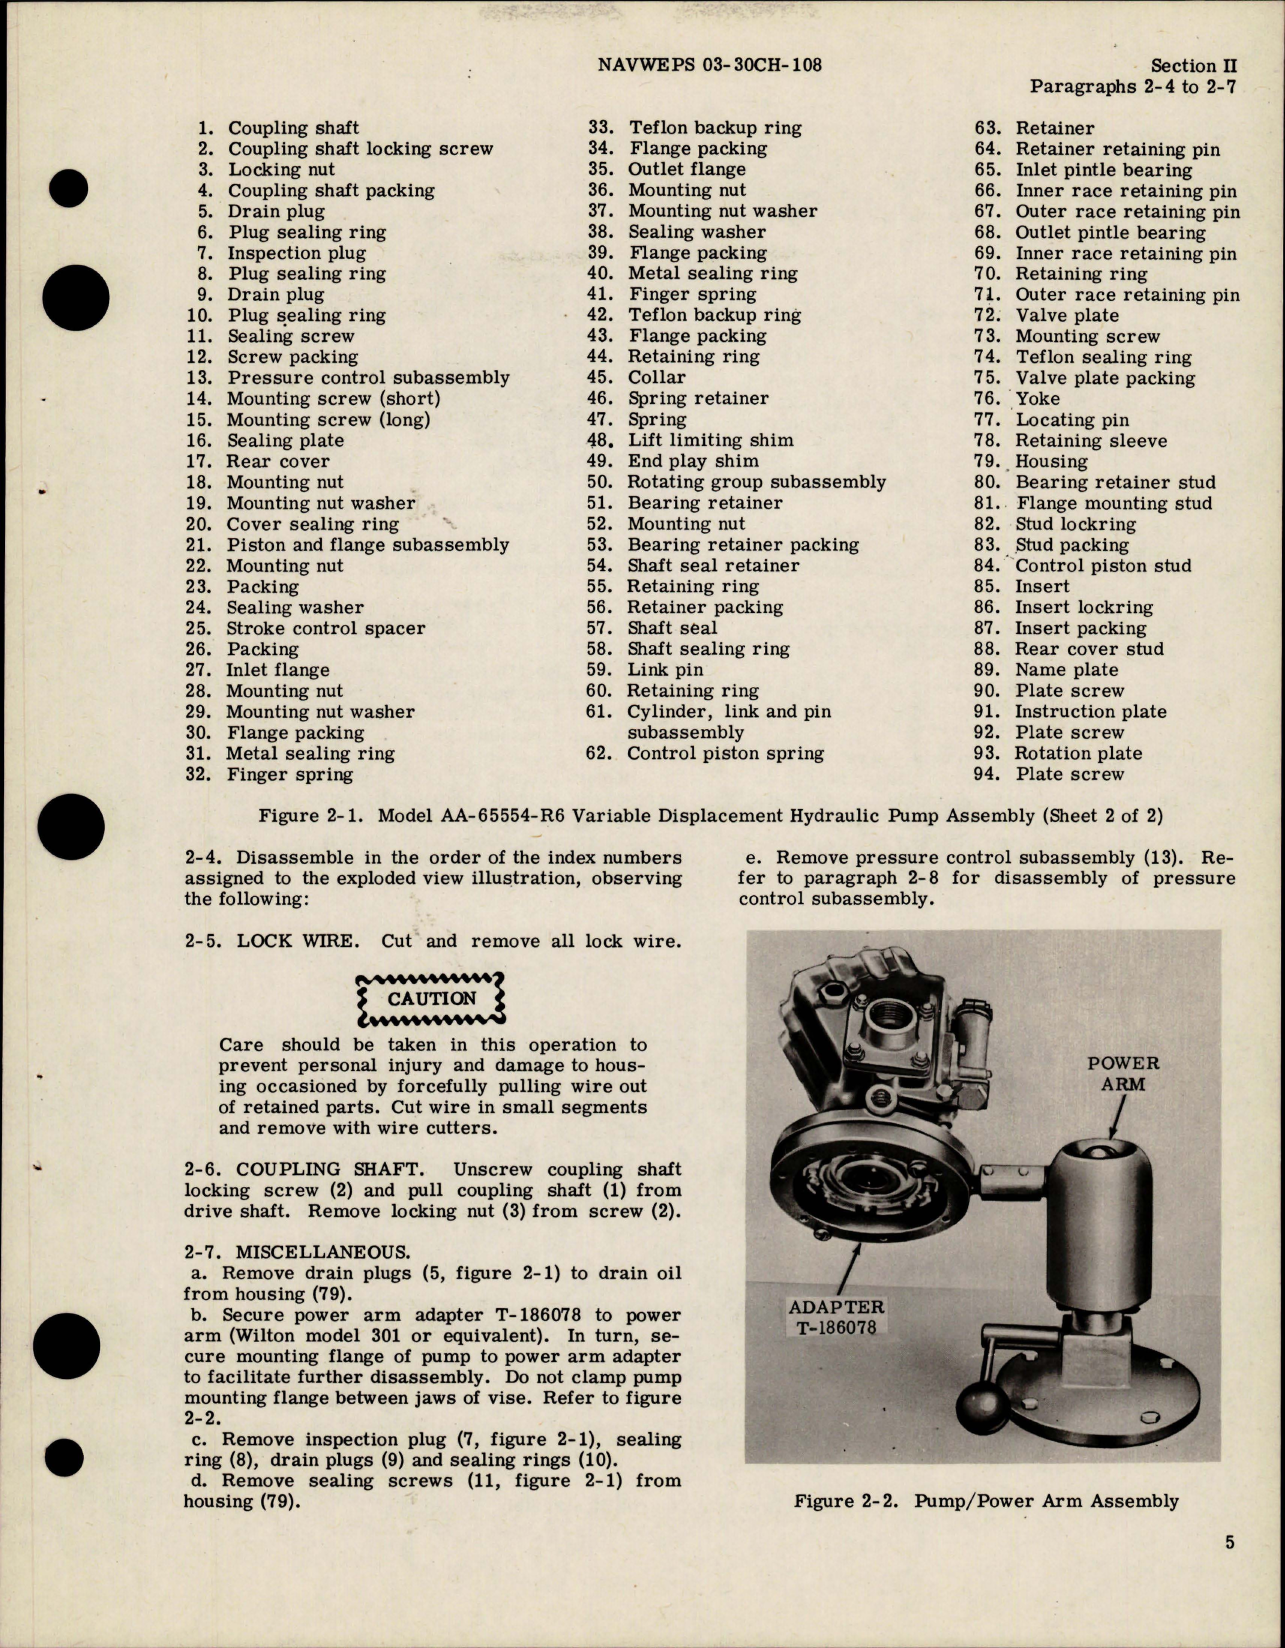 Sample page 9 from AirCorps Library document: Overhaul Instructions for Hydraulic Pump Assembly